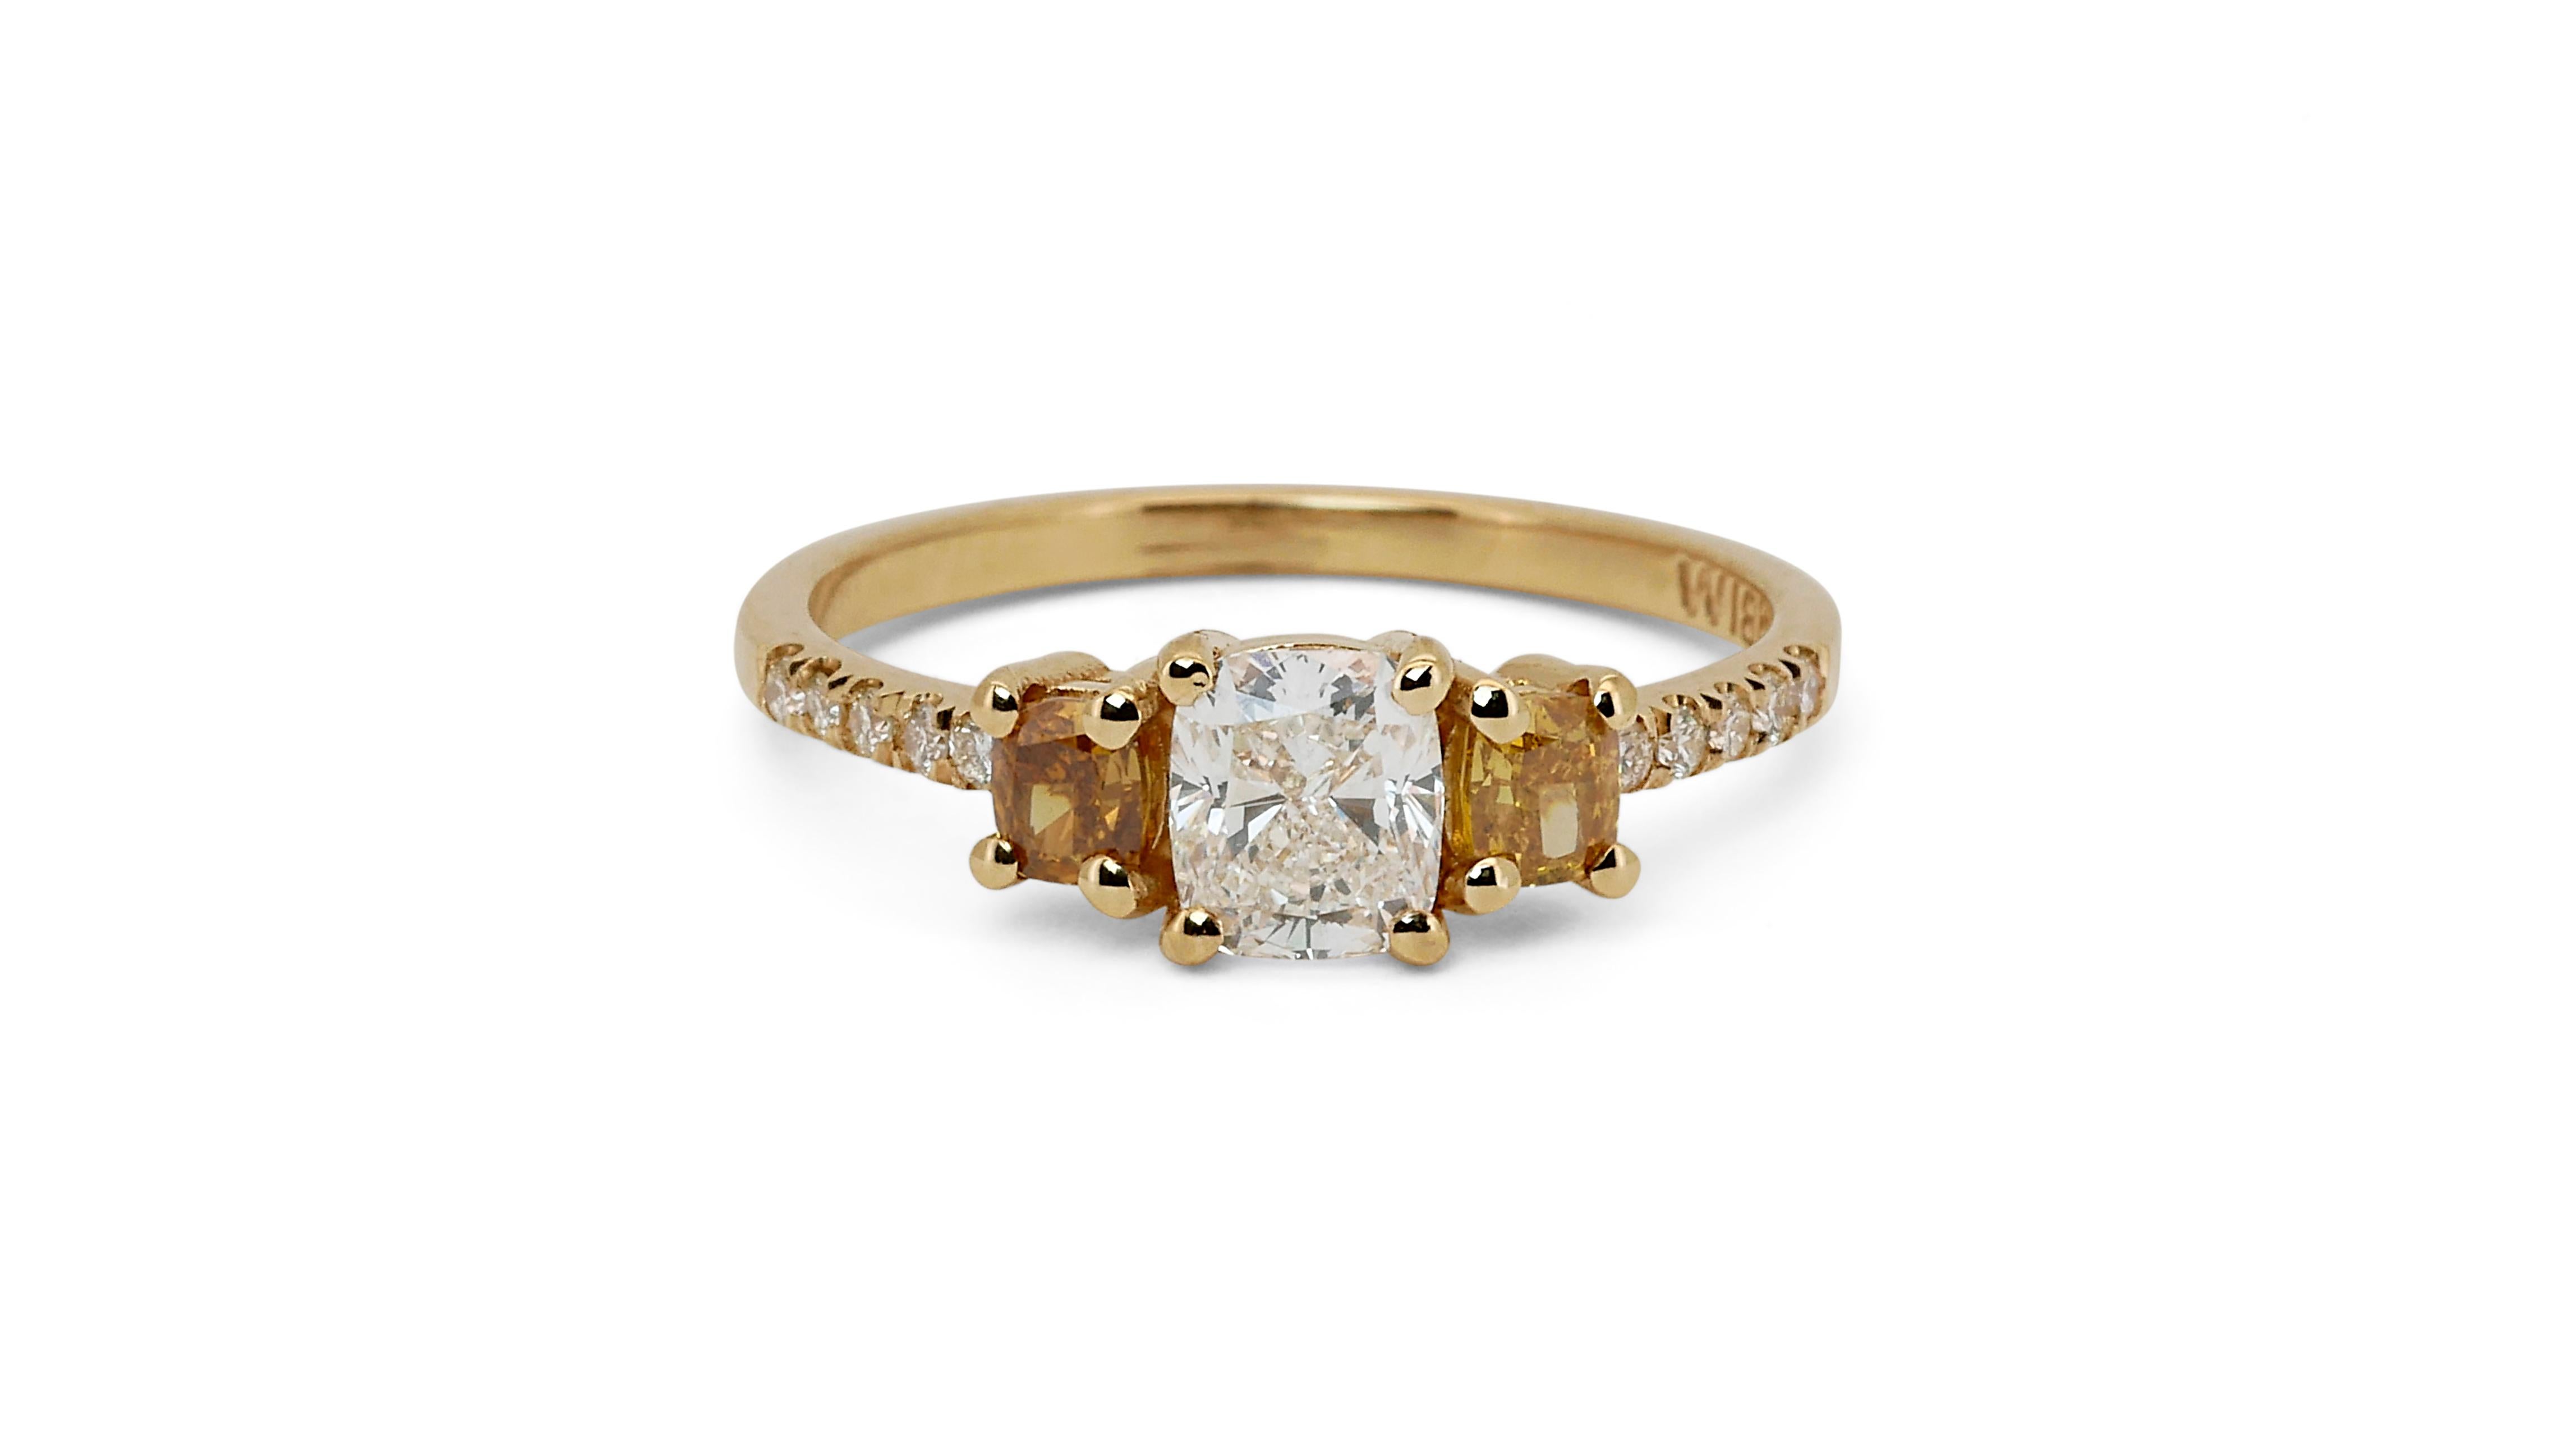 An elegant three stone ring with a dazzling 0.7 carat cushion natural diamond. It has 0.48 carat of side diamonds which add more to its elegance. The jewelry is made of 18K Yellow Gold with a high quality polish. It comes with AIG certificate and a